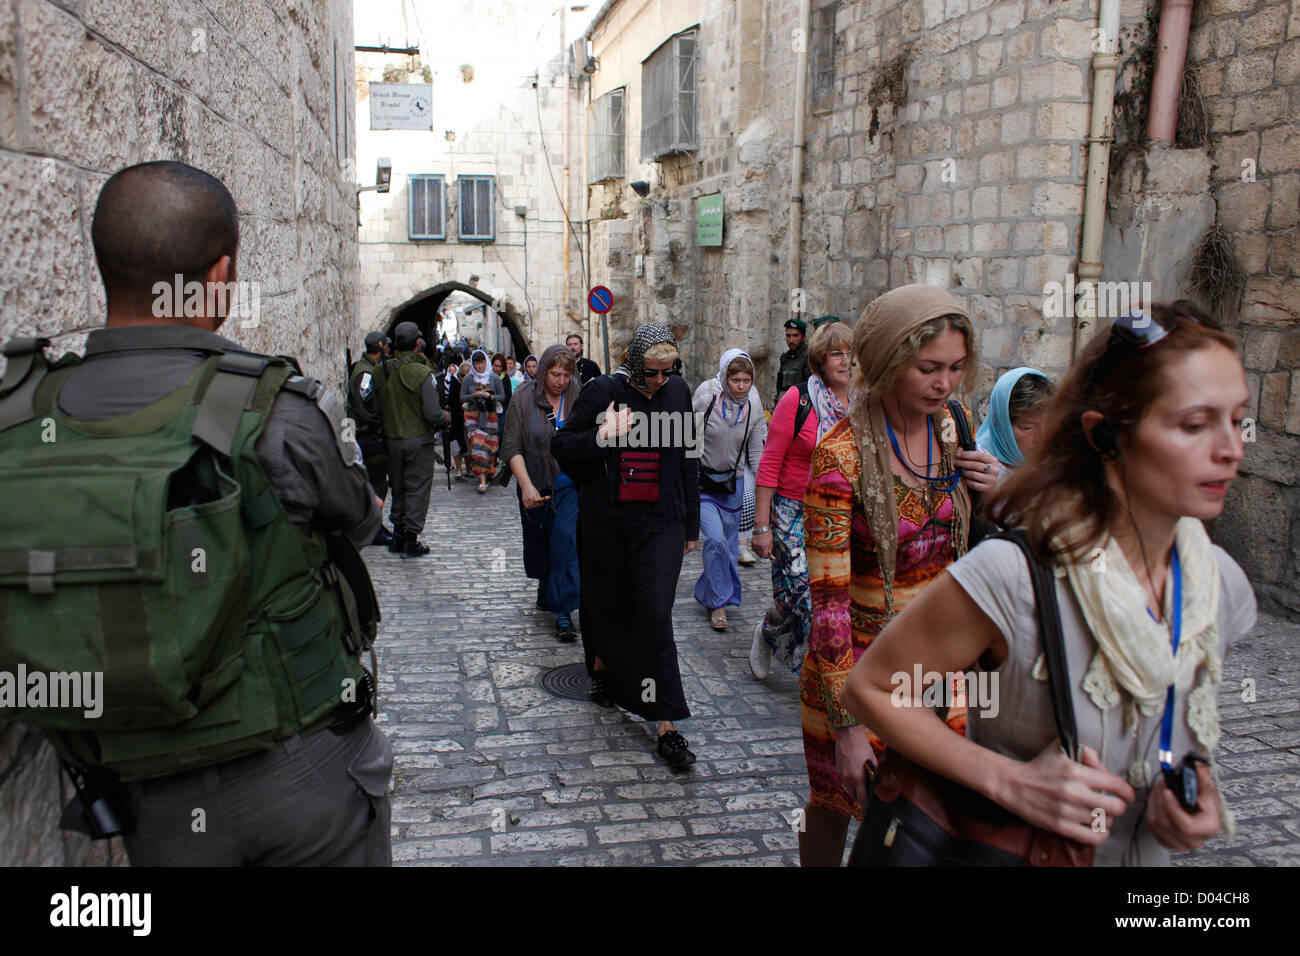 Israeli soldiers stand guard as a group of Christian pilgrims walk along Via Dolorosa street believed to be the path that Jesus walked on the way to his crucifixion in the Old City. East Jerusalem, Israel Stock Photo